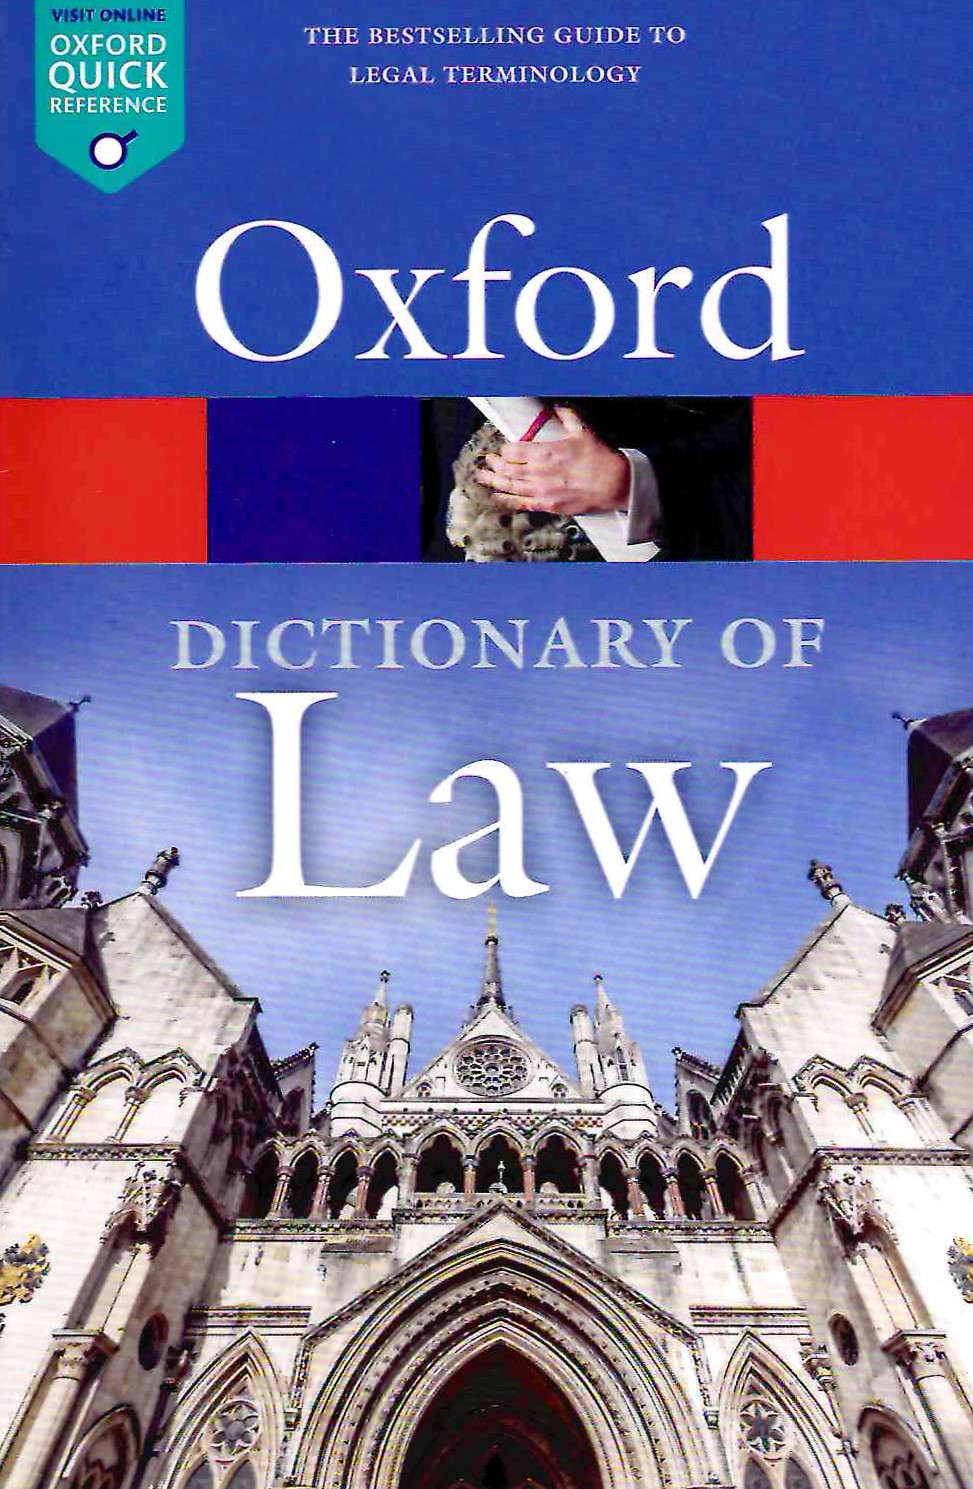 Oxford Dictionary of Law (9th edition)